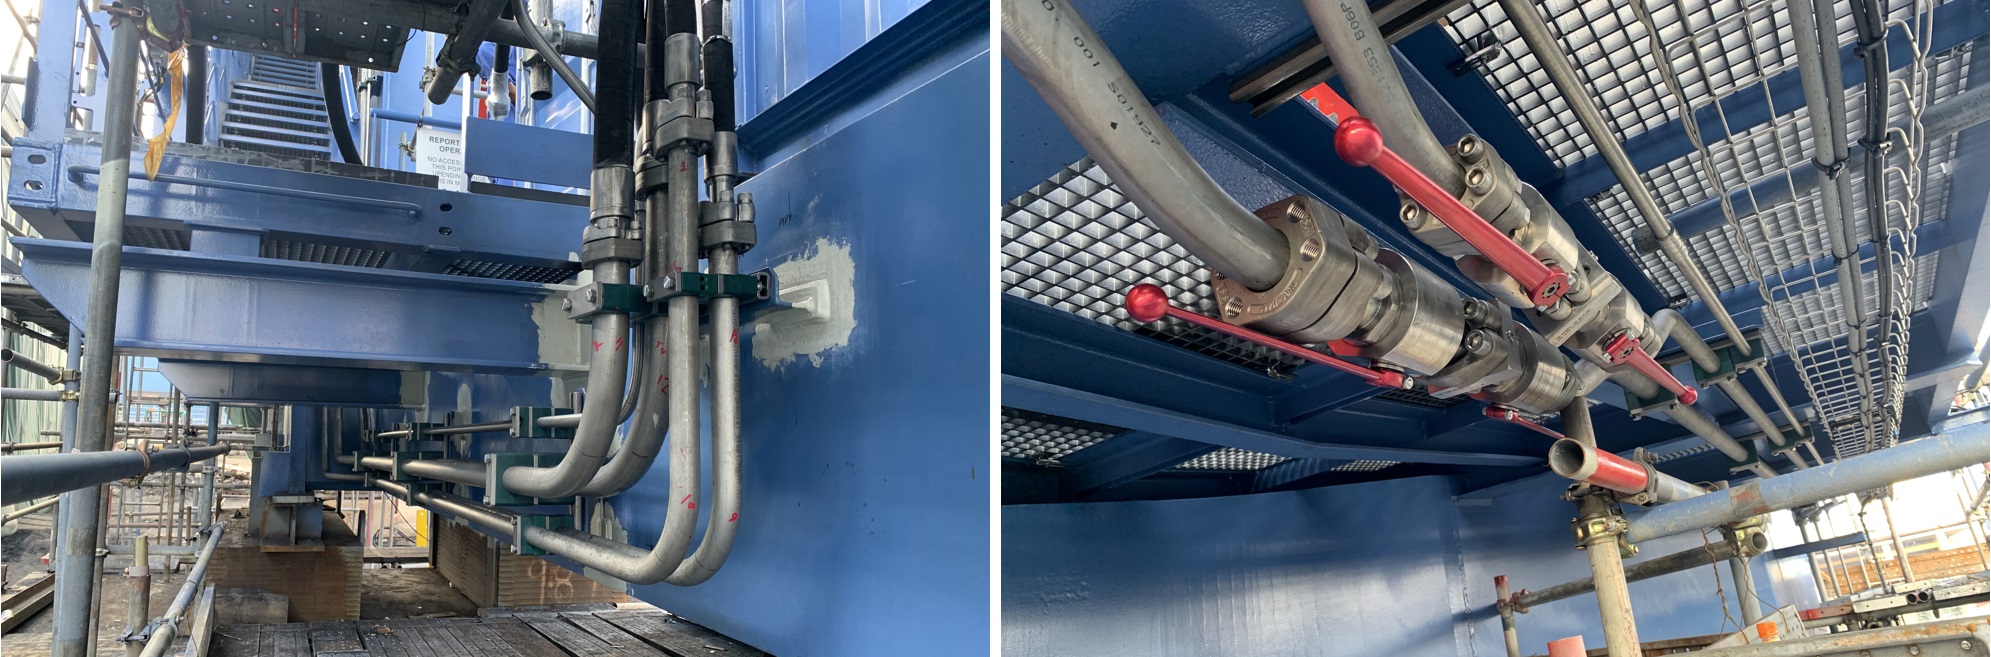 Piping connected to HPU pipes and piping connected to ball valves